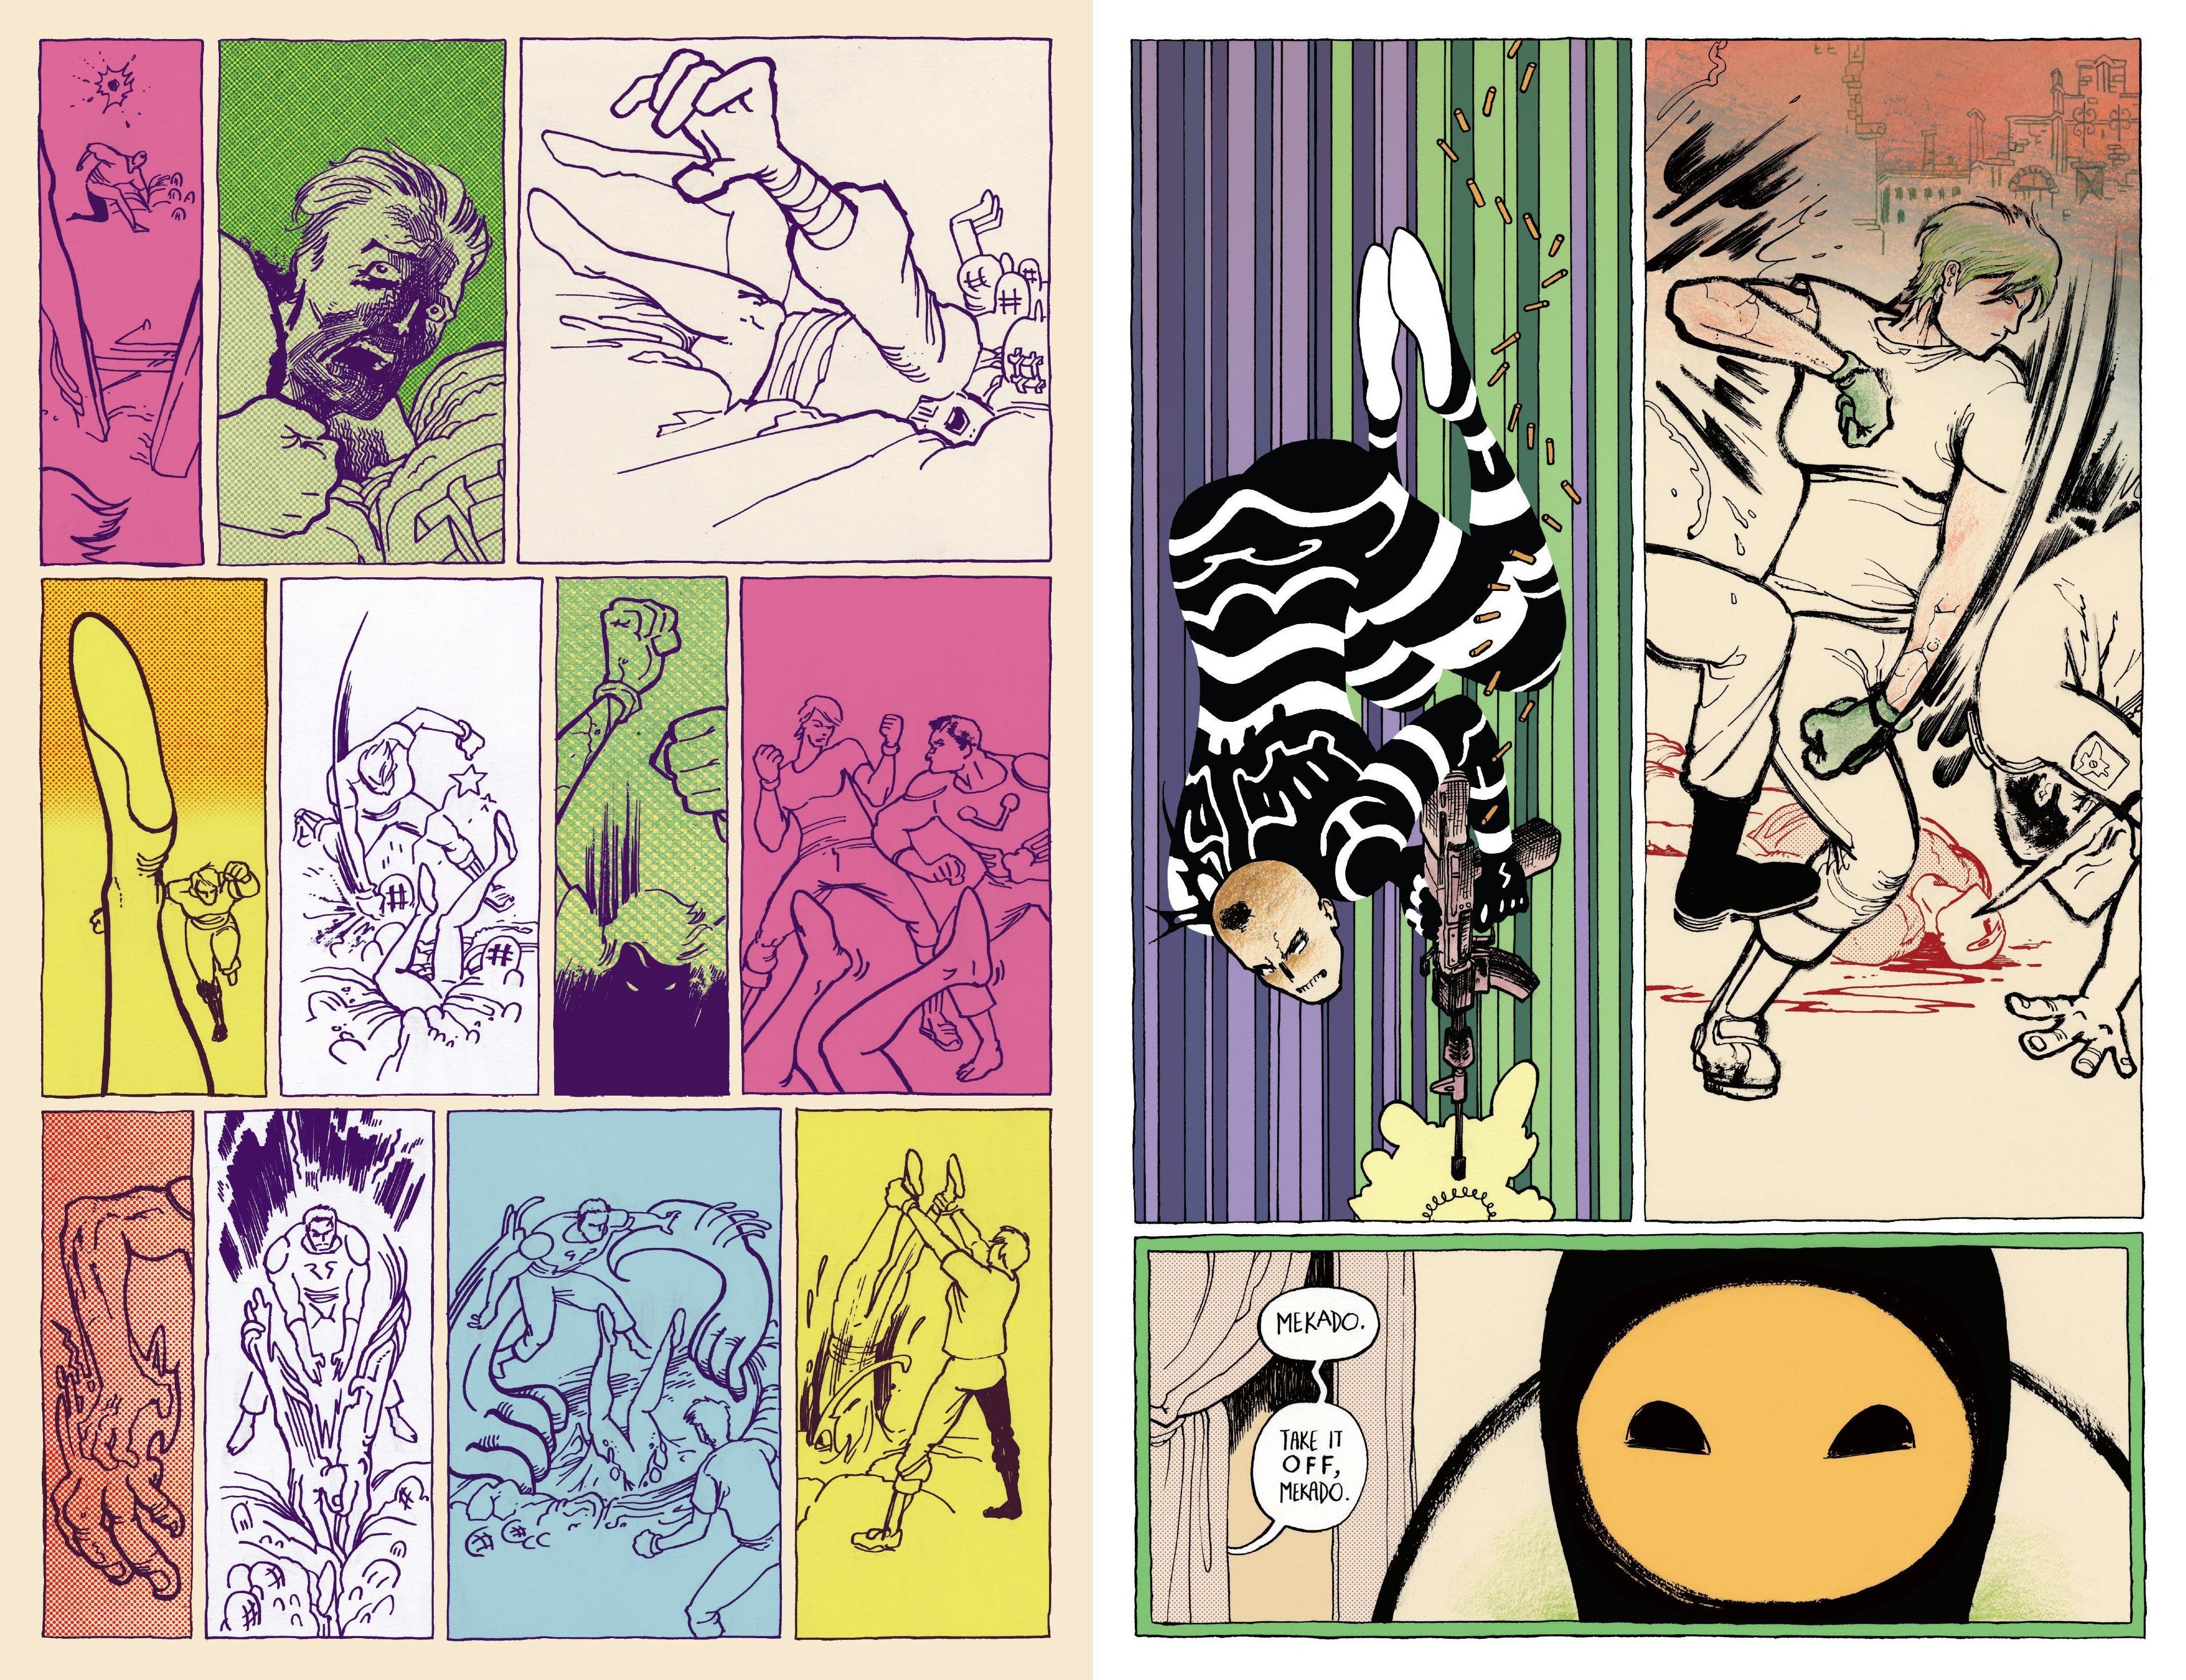 Copra Round Five review